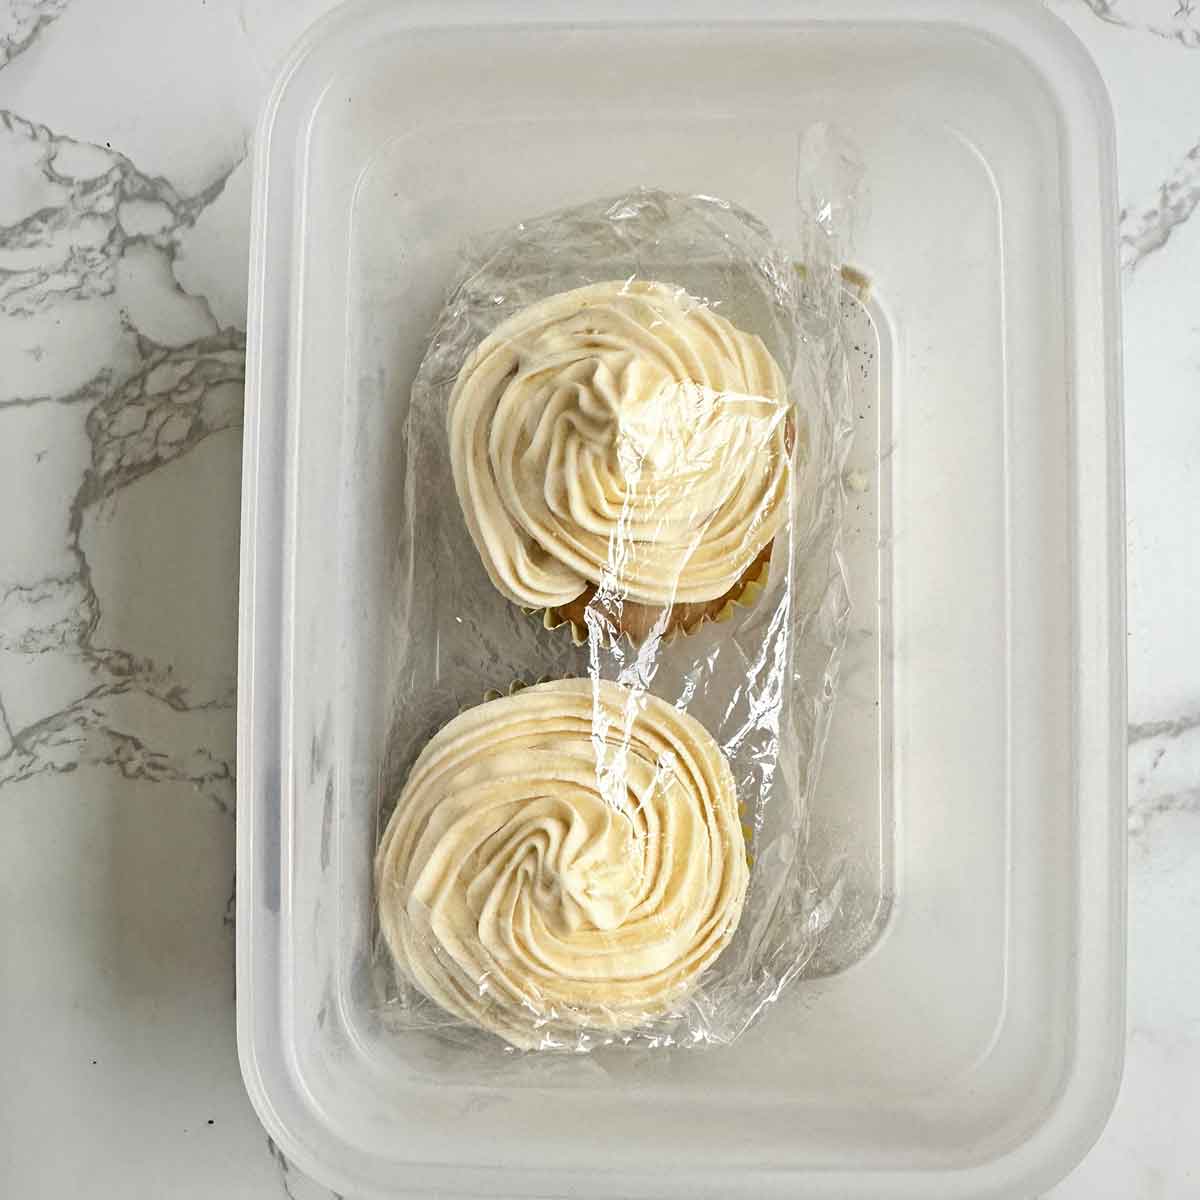 cover cupcakes with cling wrap before freezing.